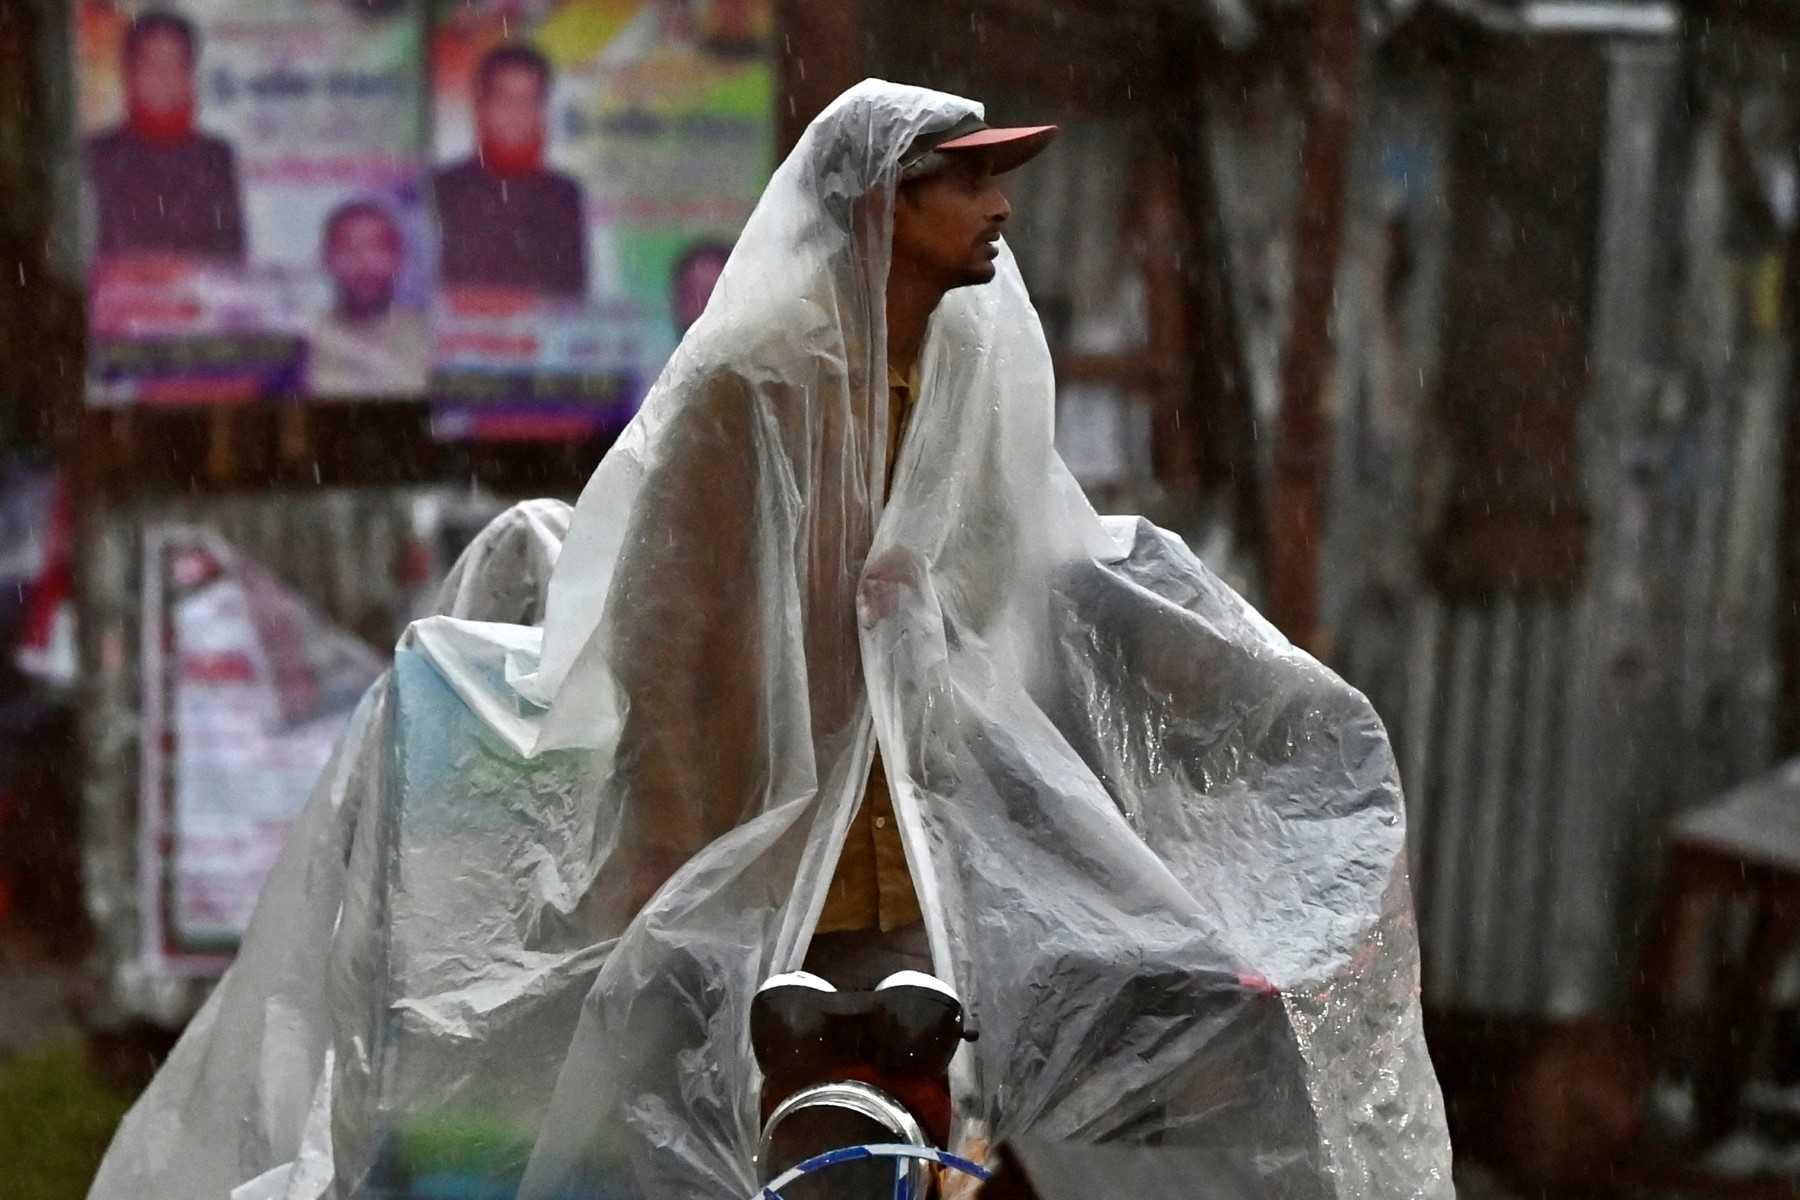 A rickshaw driver uses a plastic sheet to protect himself from rain while waiting for passengers along a street in Faridpur on Oct 24. Photo: AFP